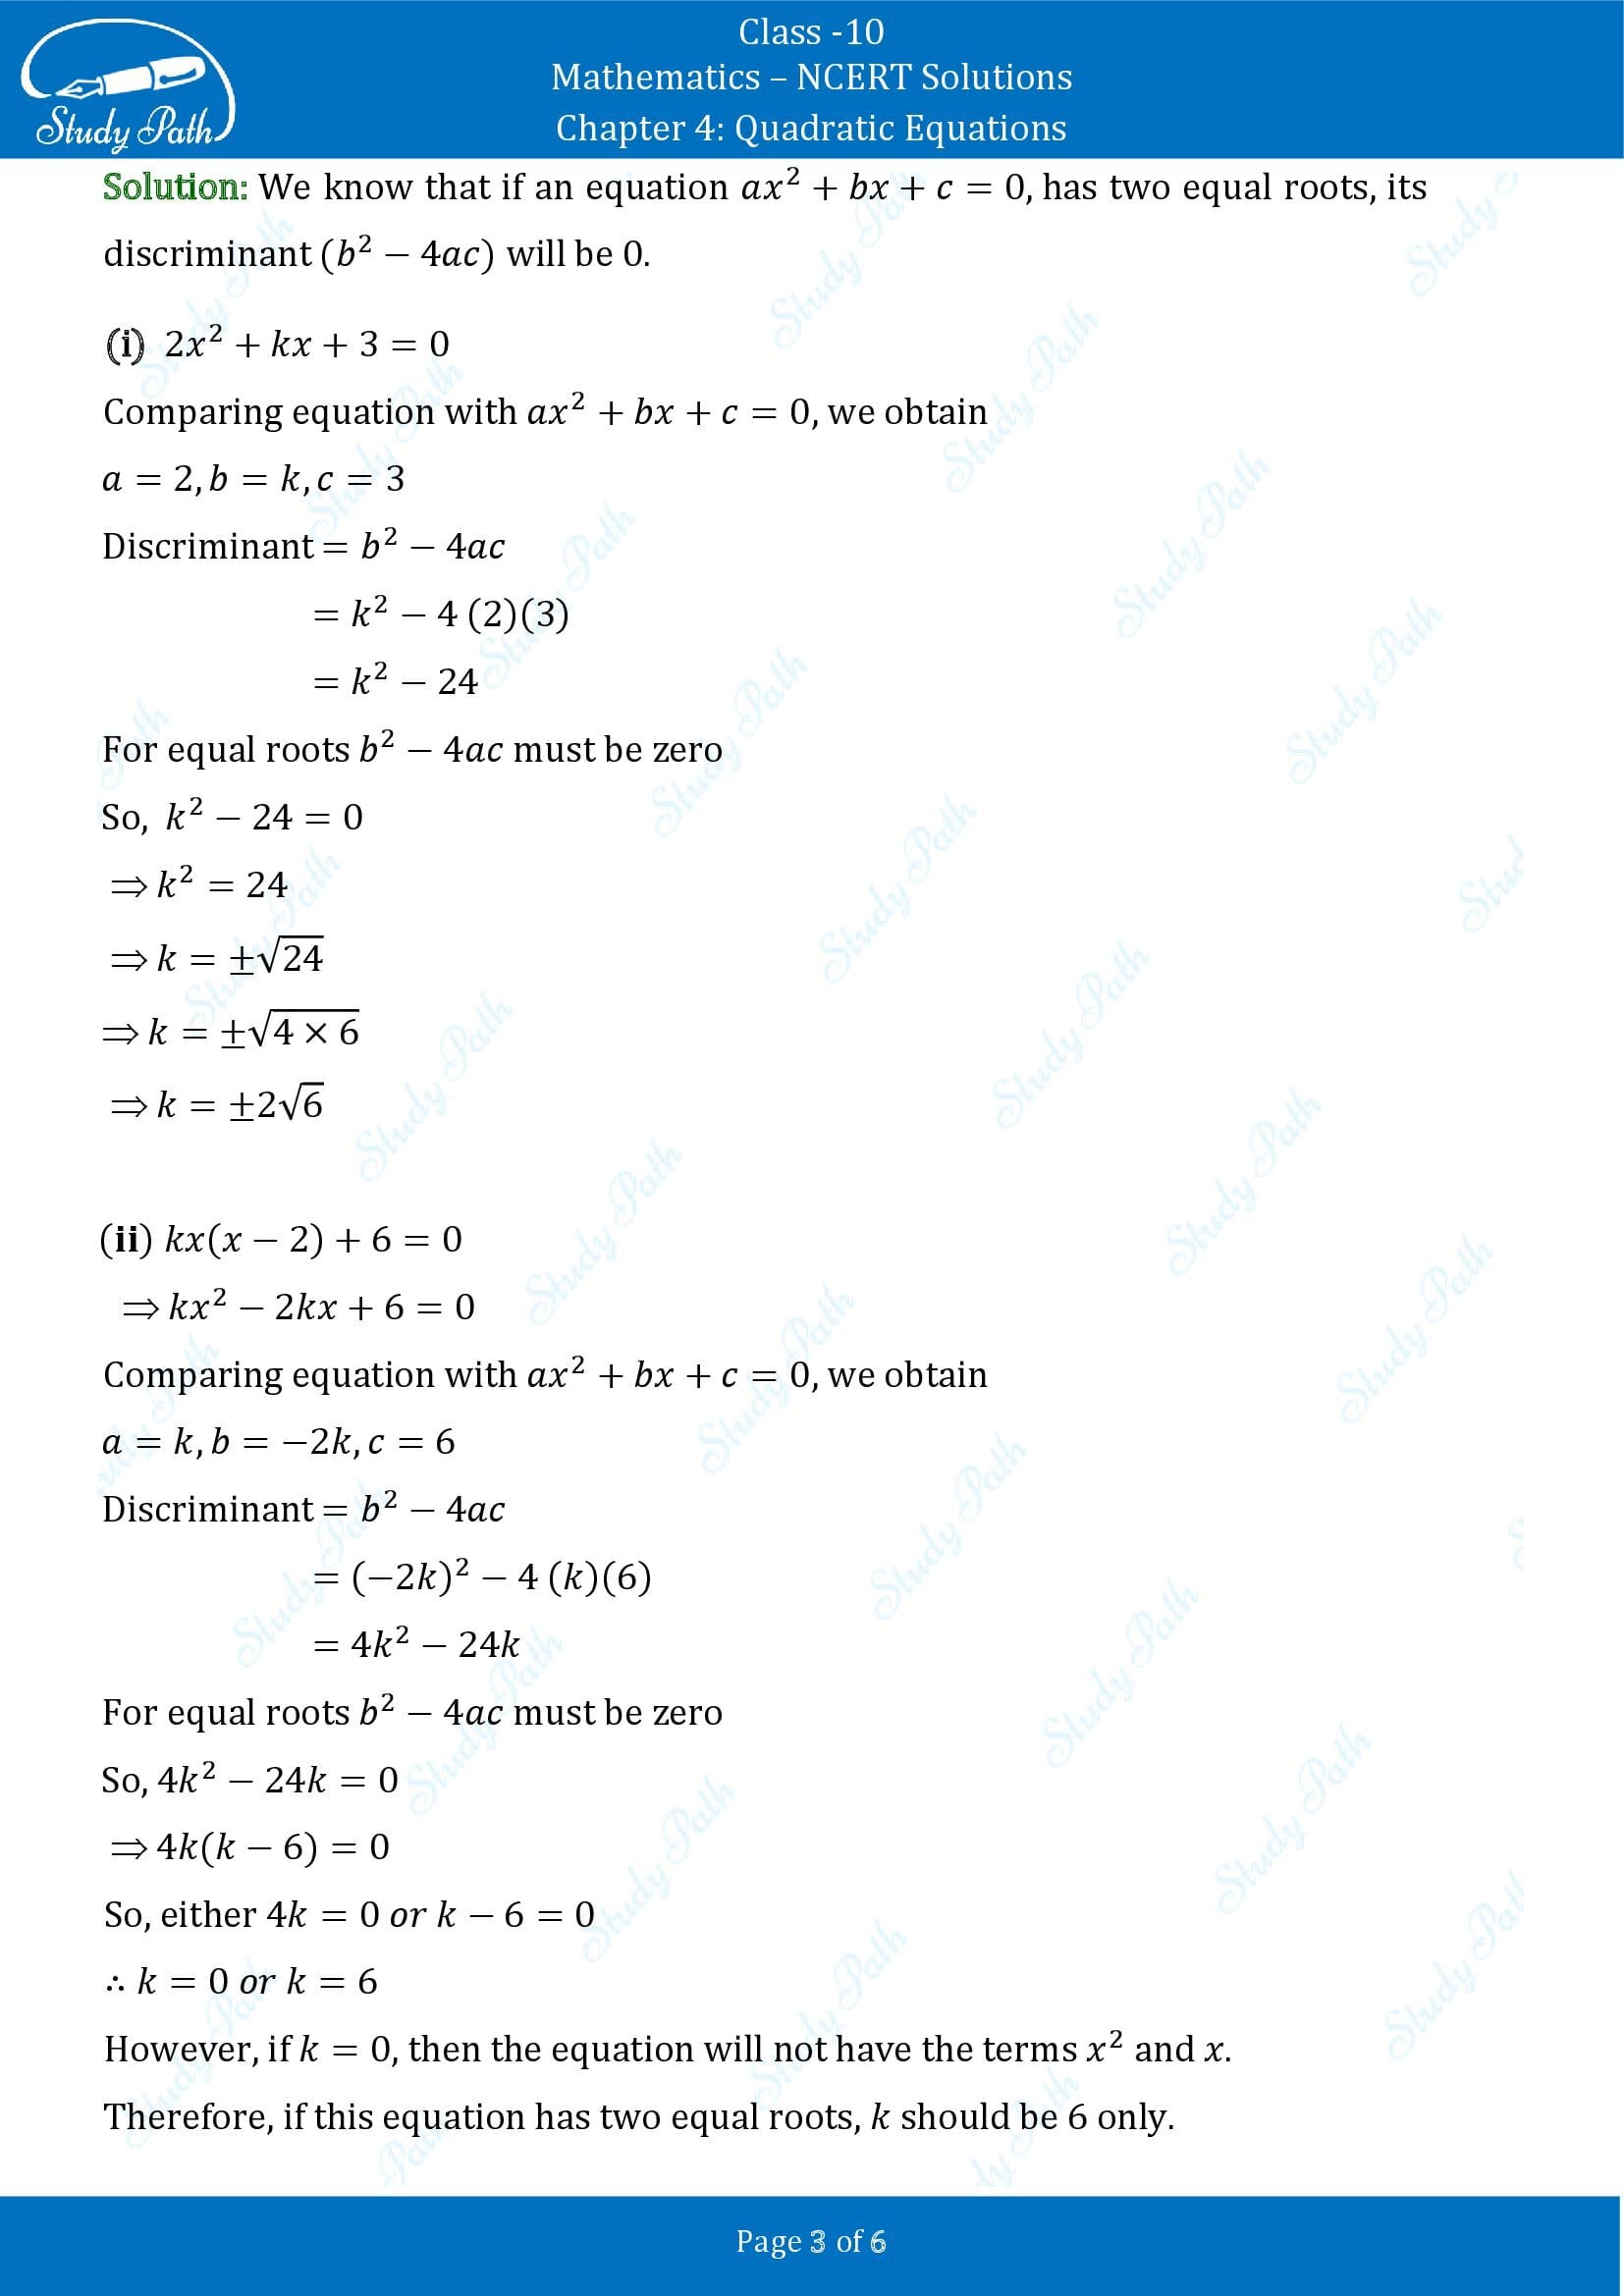 NCERT Solutions for Class 10 Maths Chapter 4 Quadratic Equations Exercise 4.4 00003